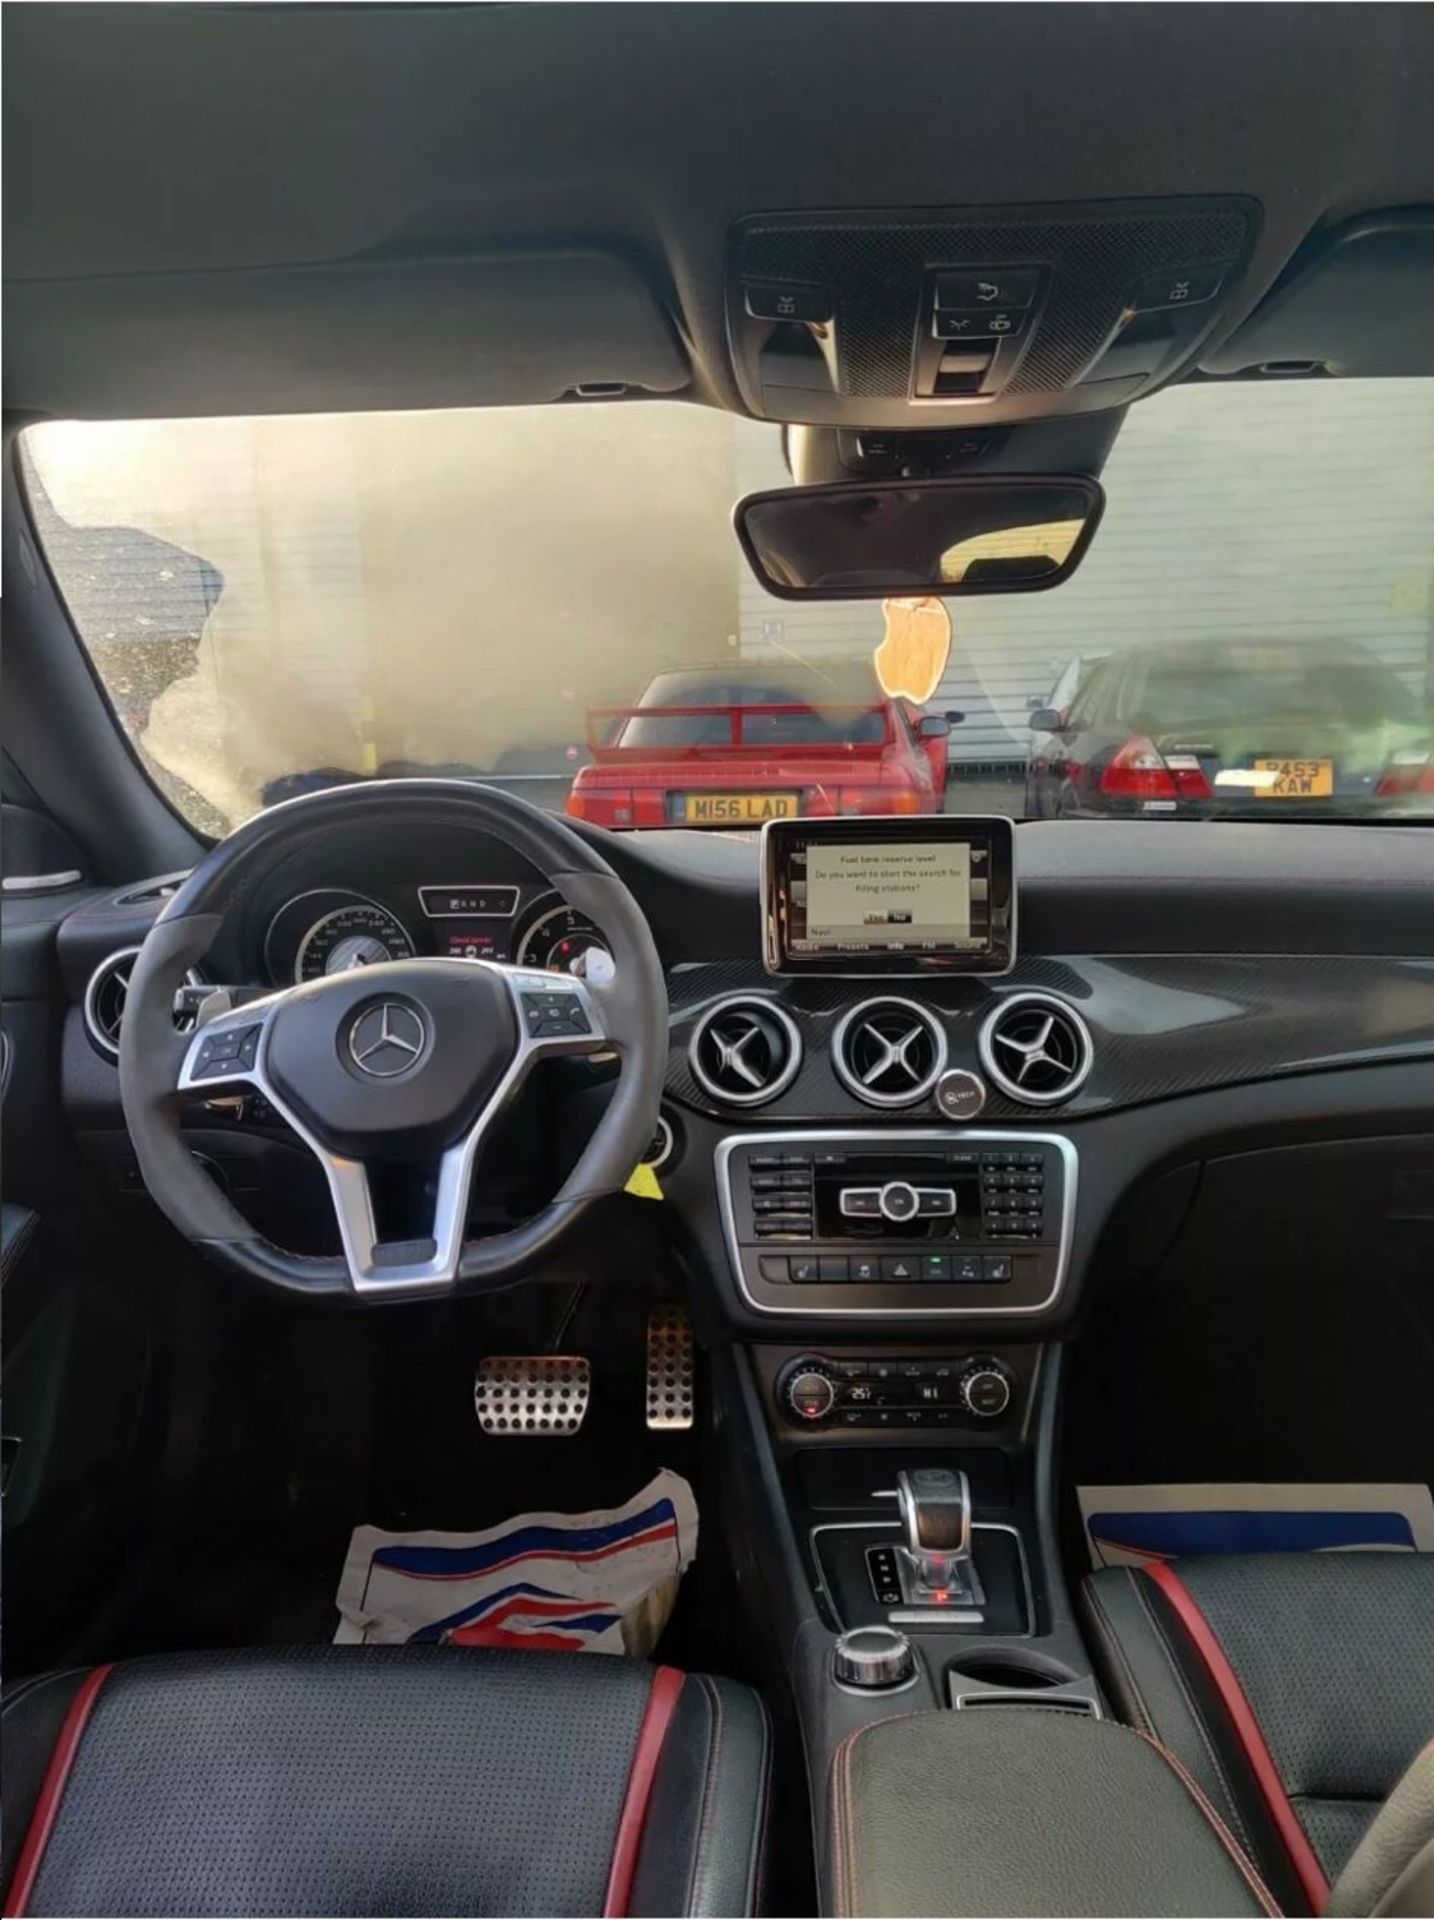 MERCEDES CLA45 AMG TOP SPEC EDITION ONE LIMITED EDITION 1 OF 500, BUCKET SEATS LHD, 40K MILES - Image 5 of 9